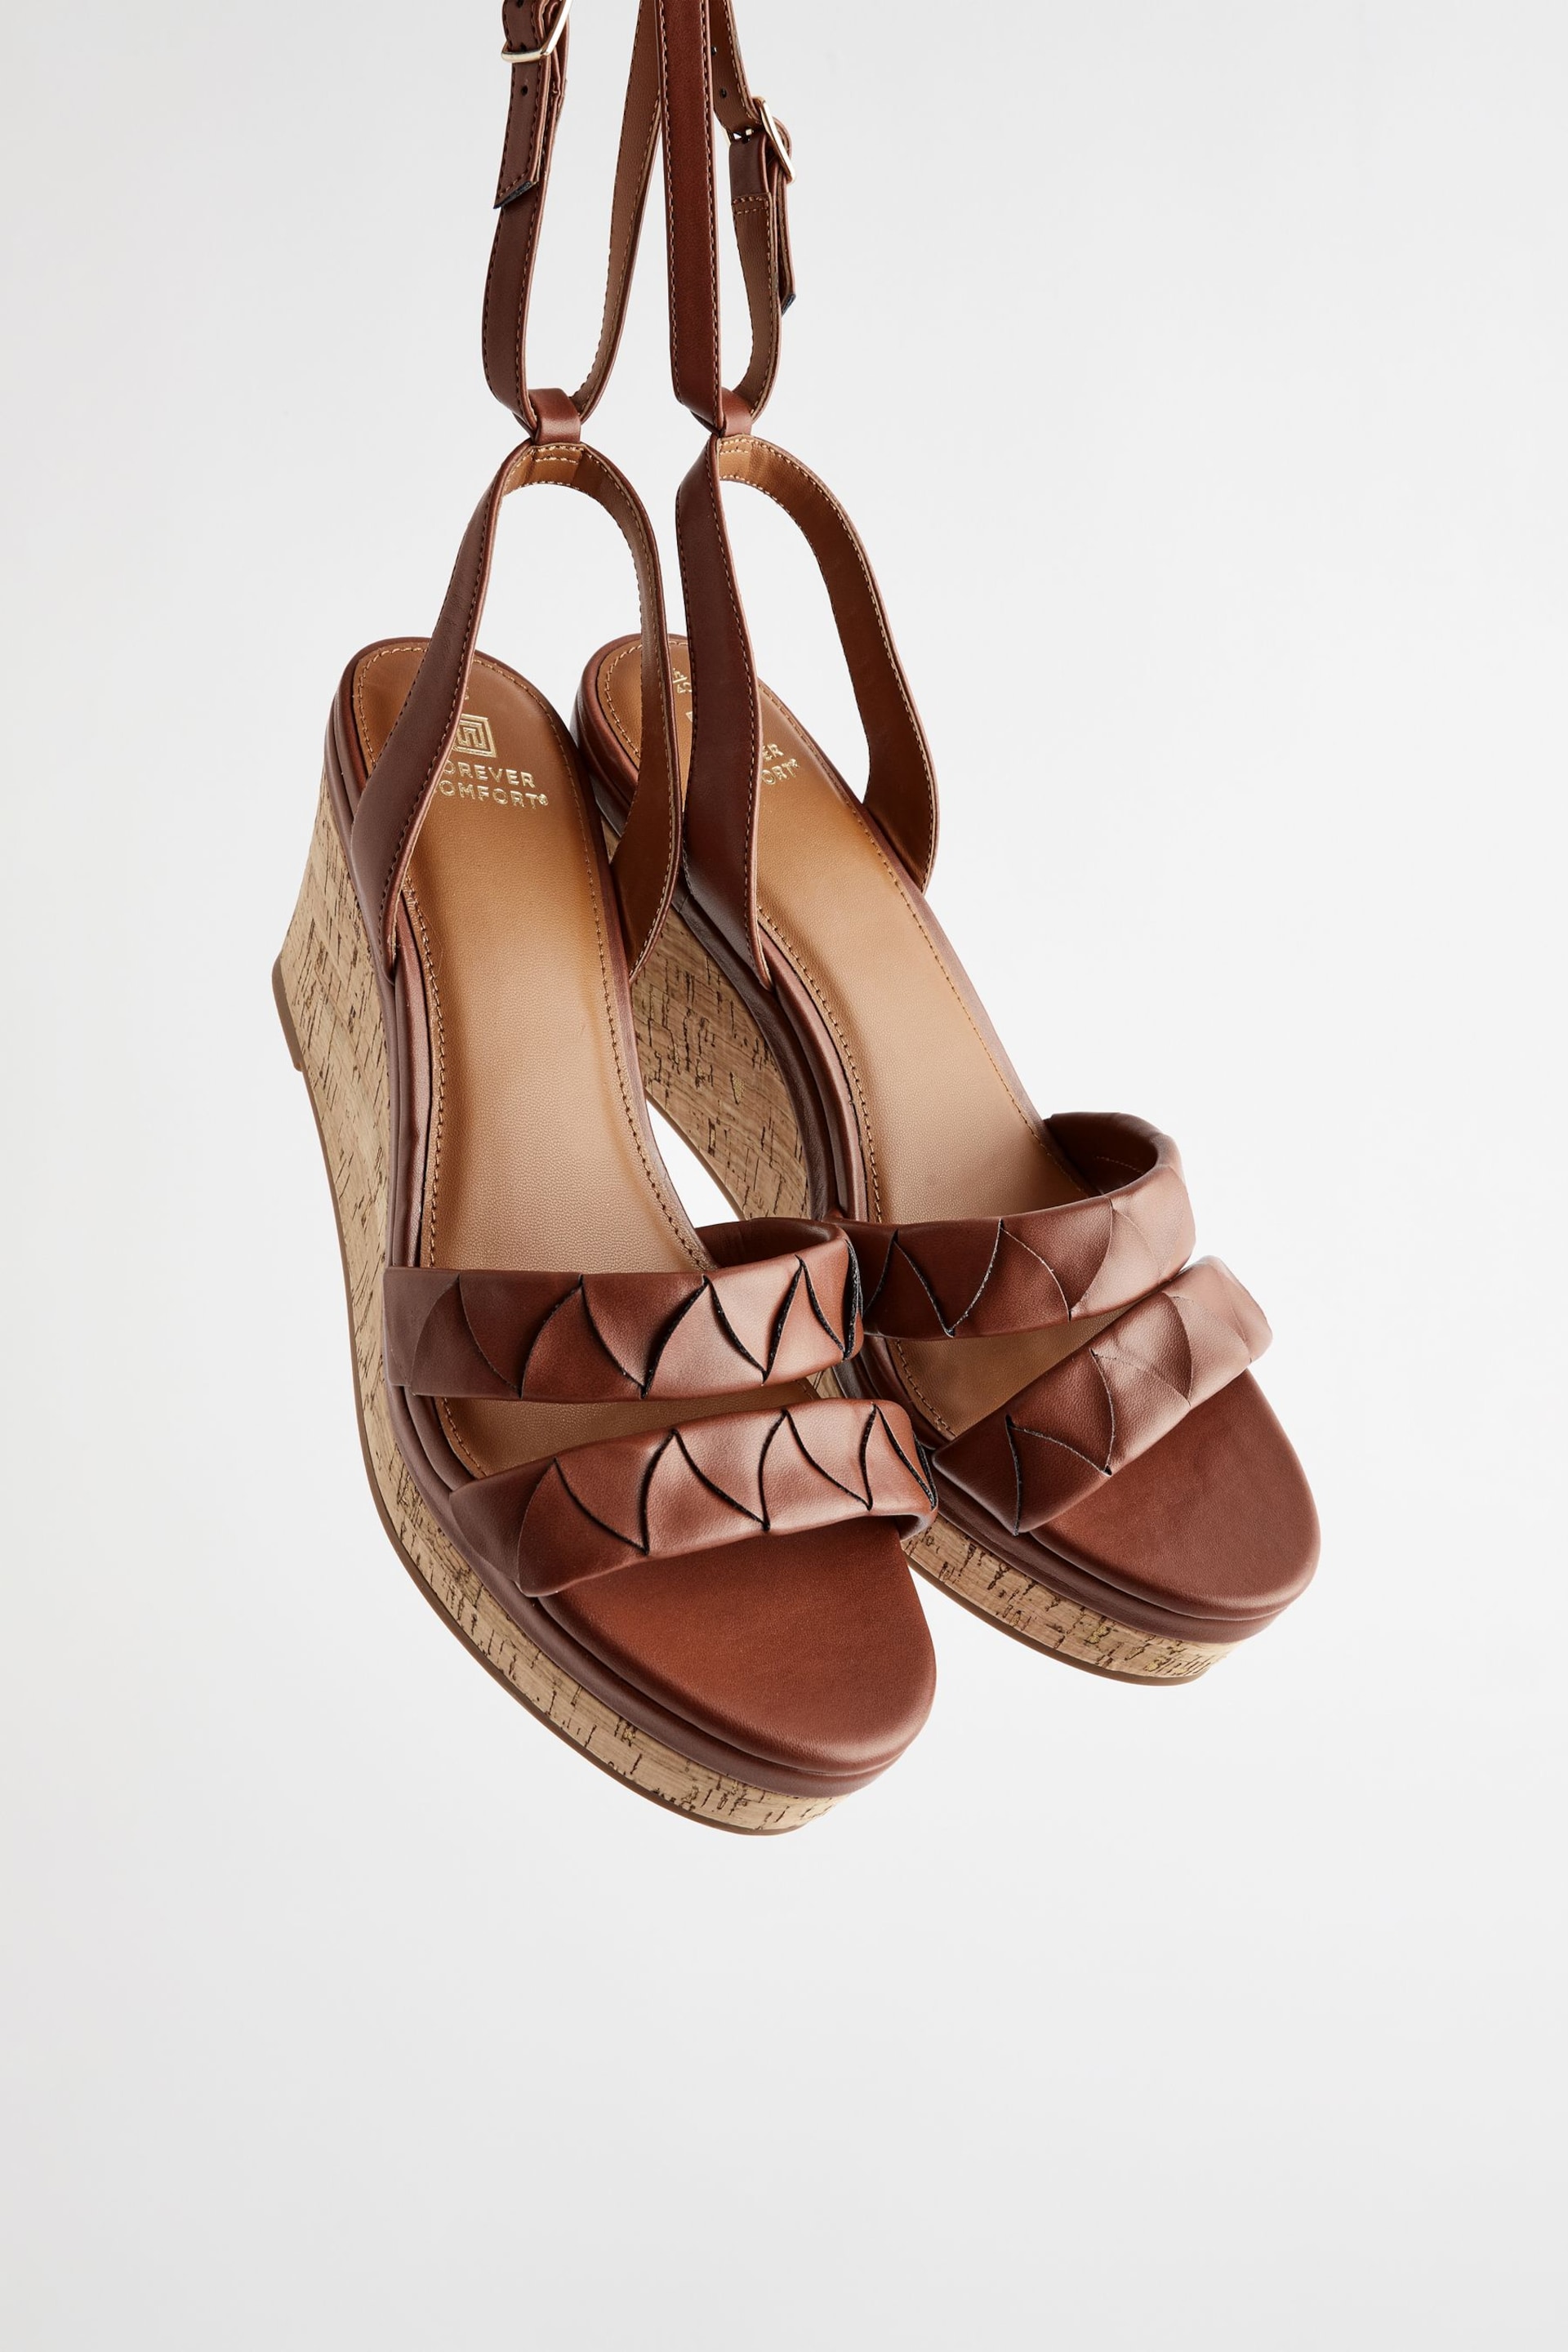 Tan Brown Regular/Wide Fit Forever Comfort® Double Strap Wedges - Image 9 of 9